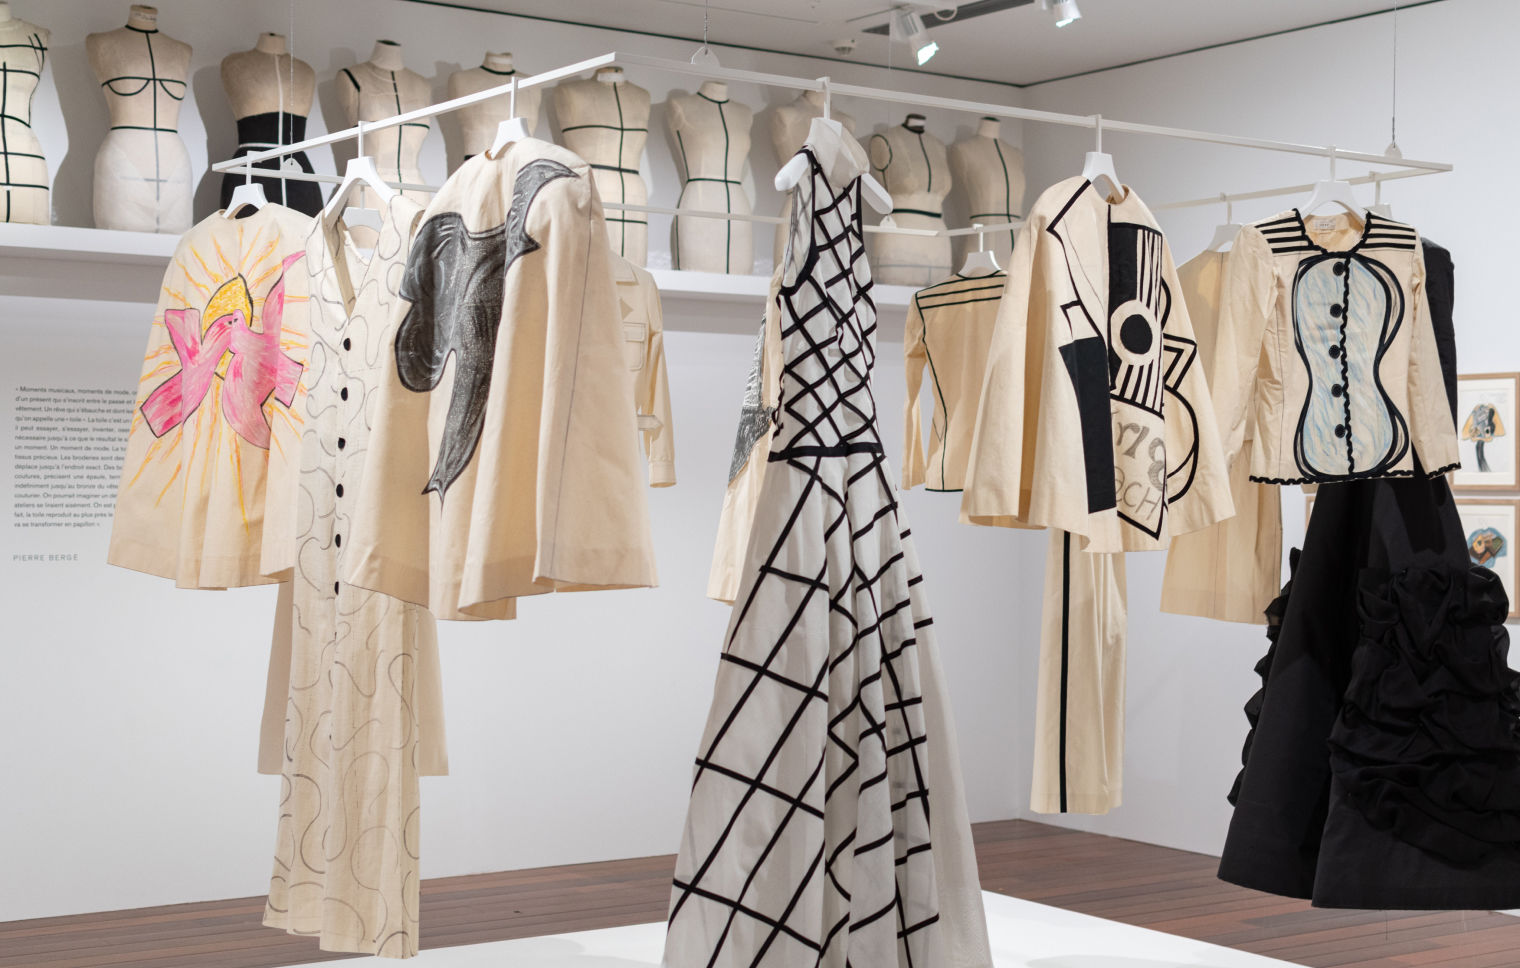 Muslin designs hang from the ceiling showcasing in-progress designs by Yves Saint Laurent